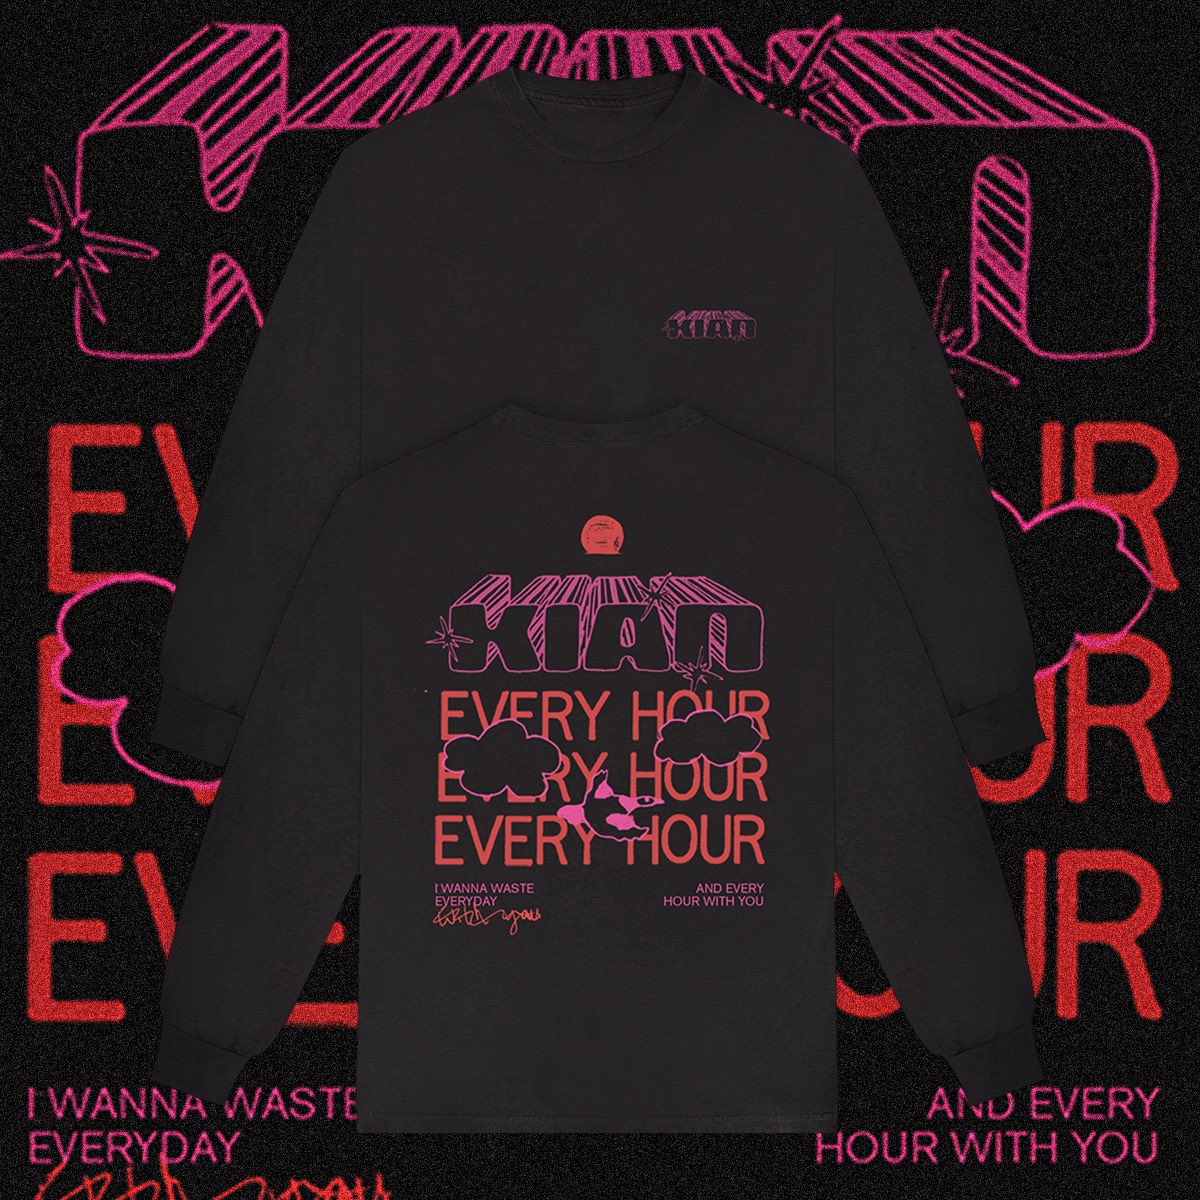 NEW MERCH!!! ‘Every Hour’ long sleeve drops 9am tomorrow. Stock is super limited so get in quick!